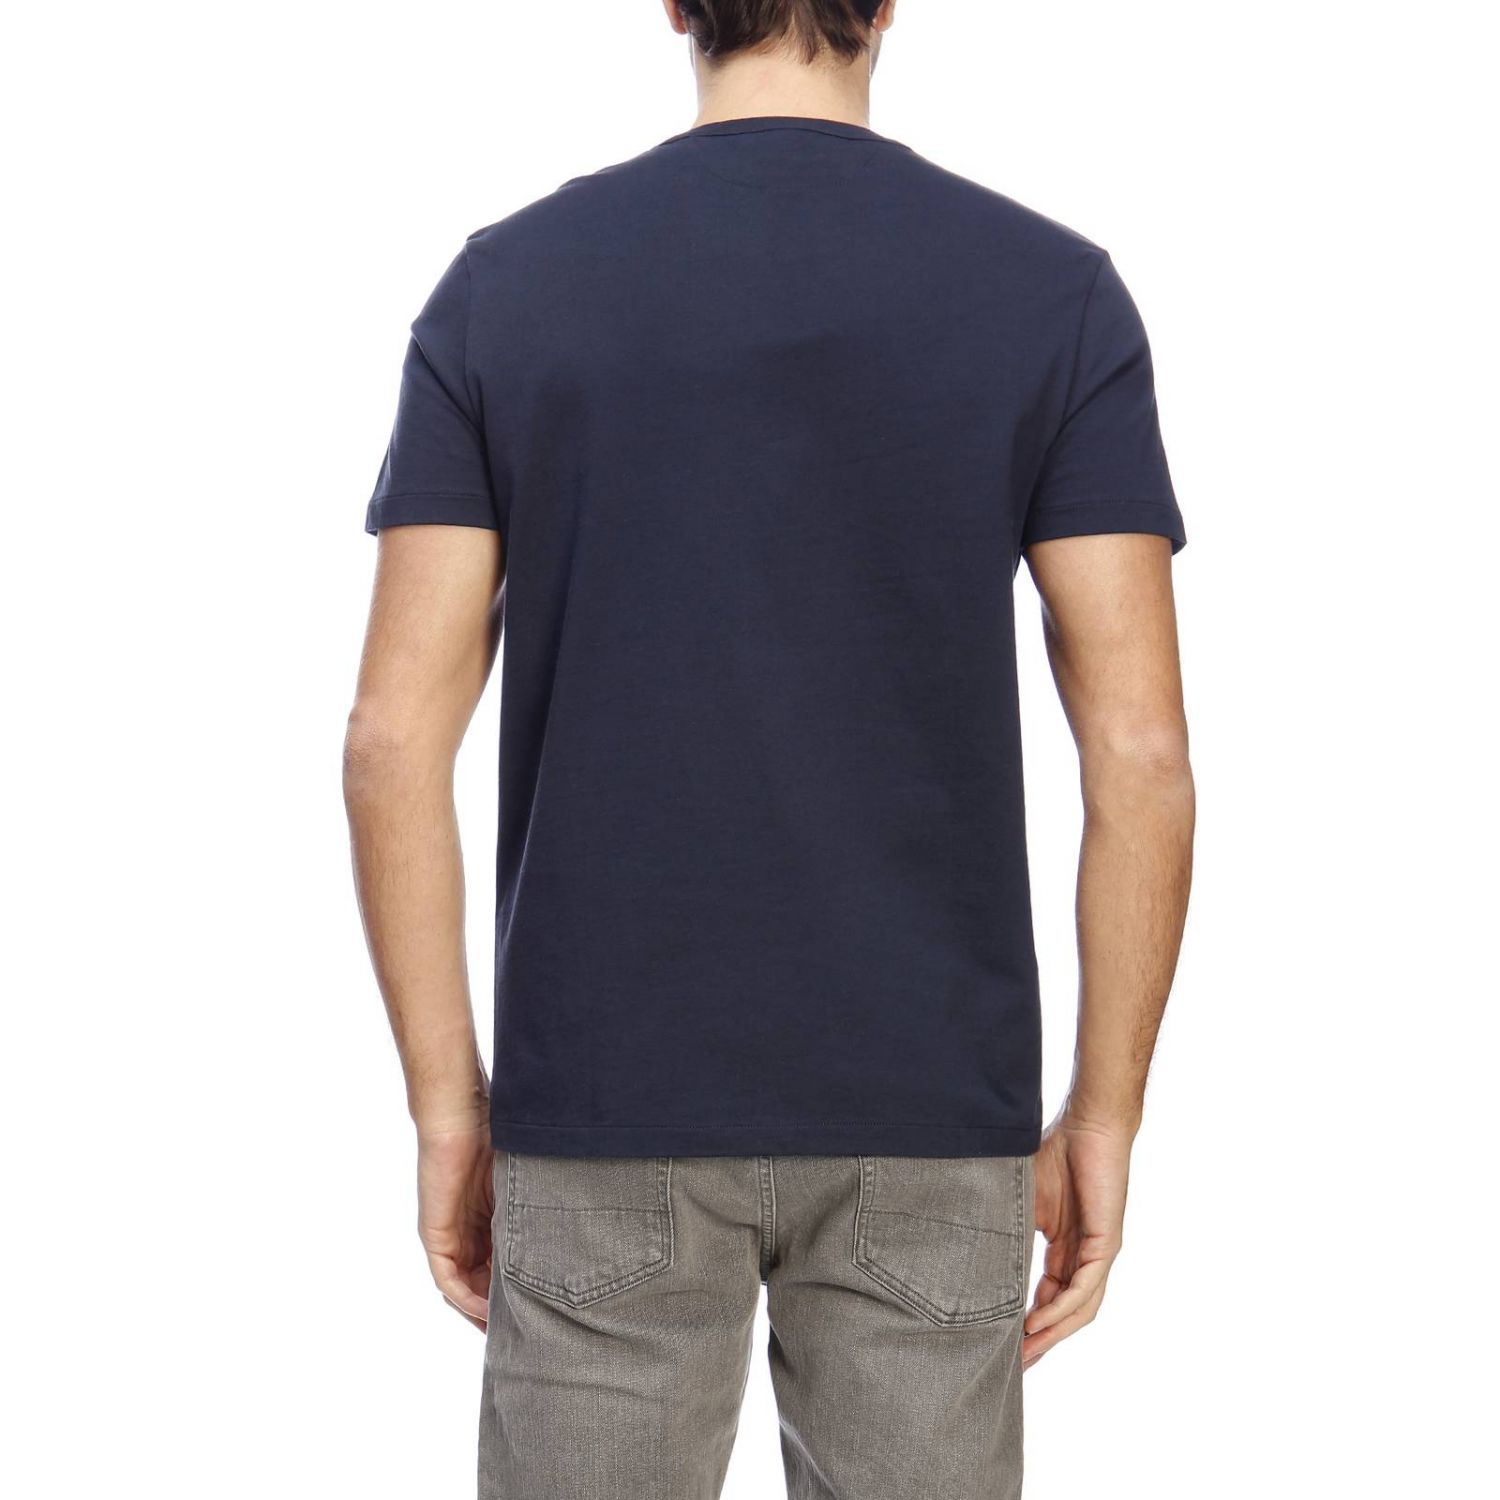 Tom Ford Outlet: t-shirt for man - Navy | Tom Ford t-shirt TFJ902BS402 ...